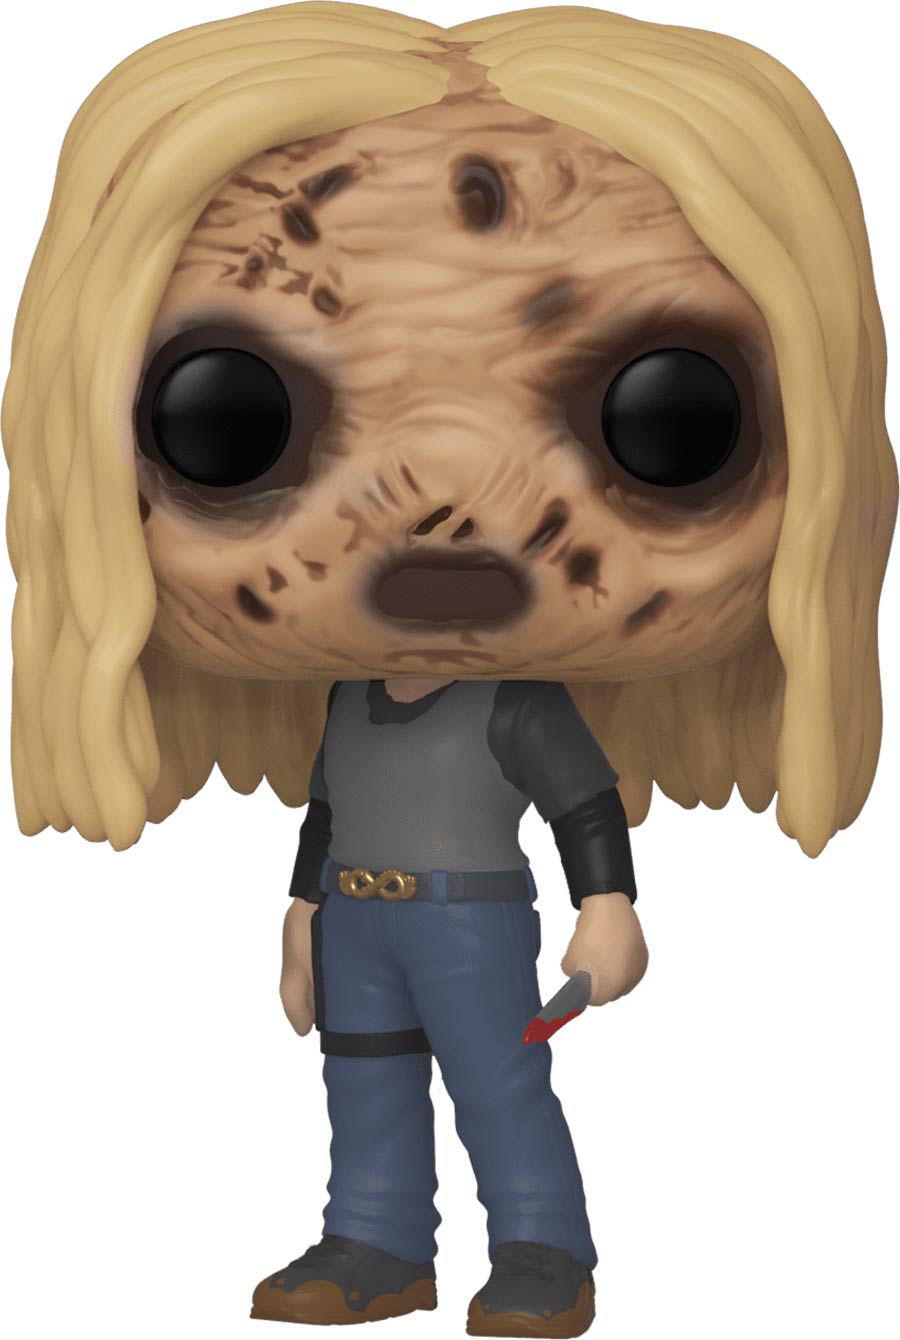 POP Television The Walking Dead Alpha With Mask Vinyl Figure